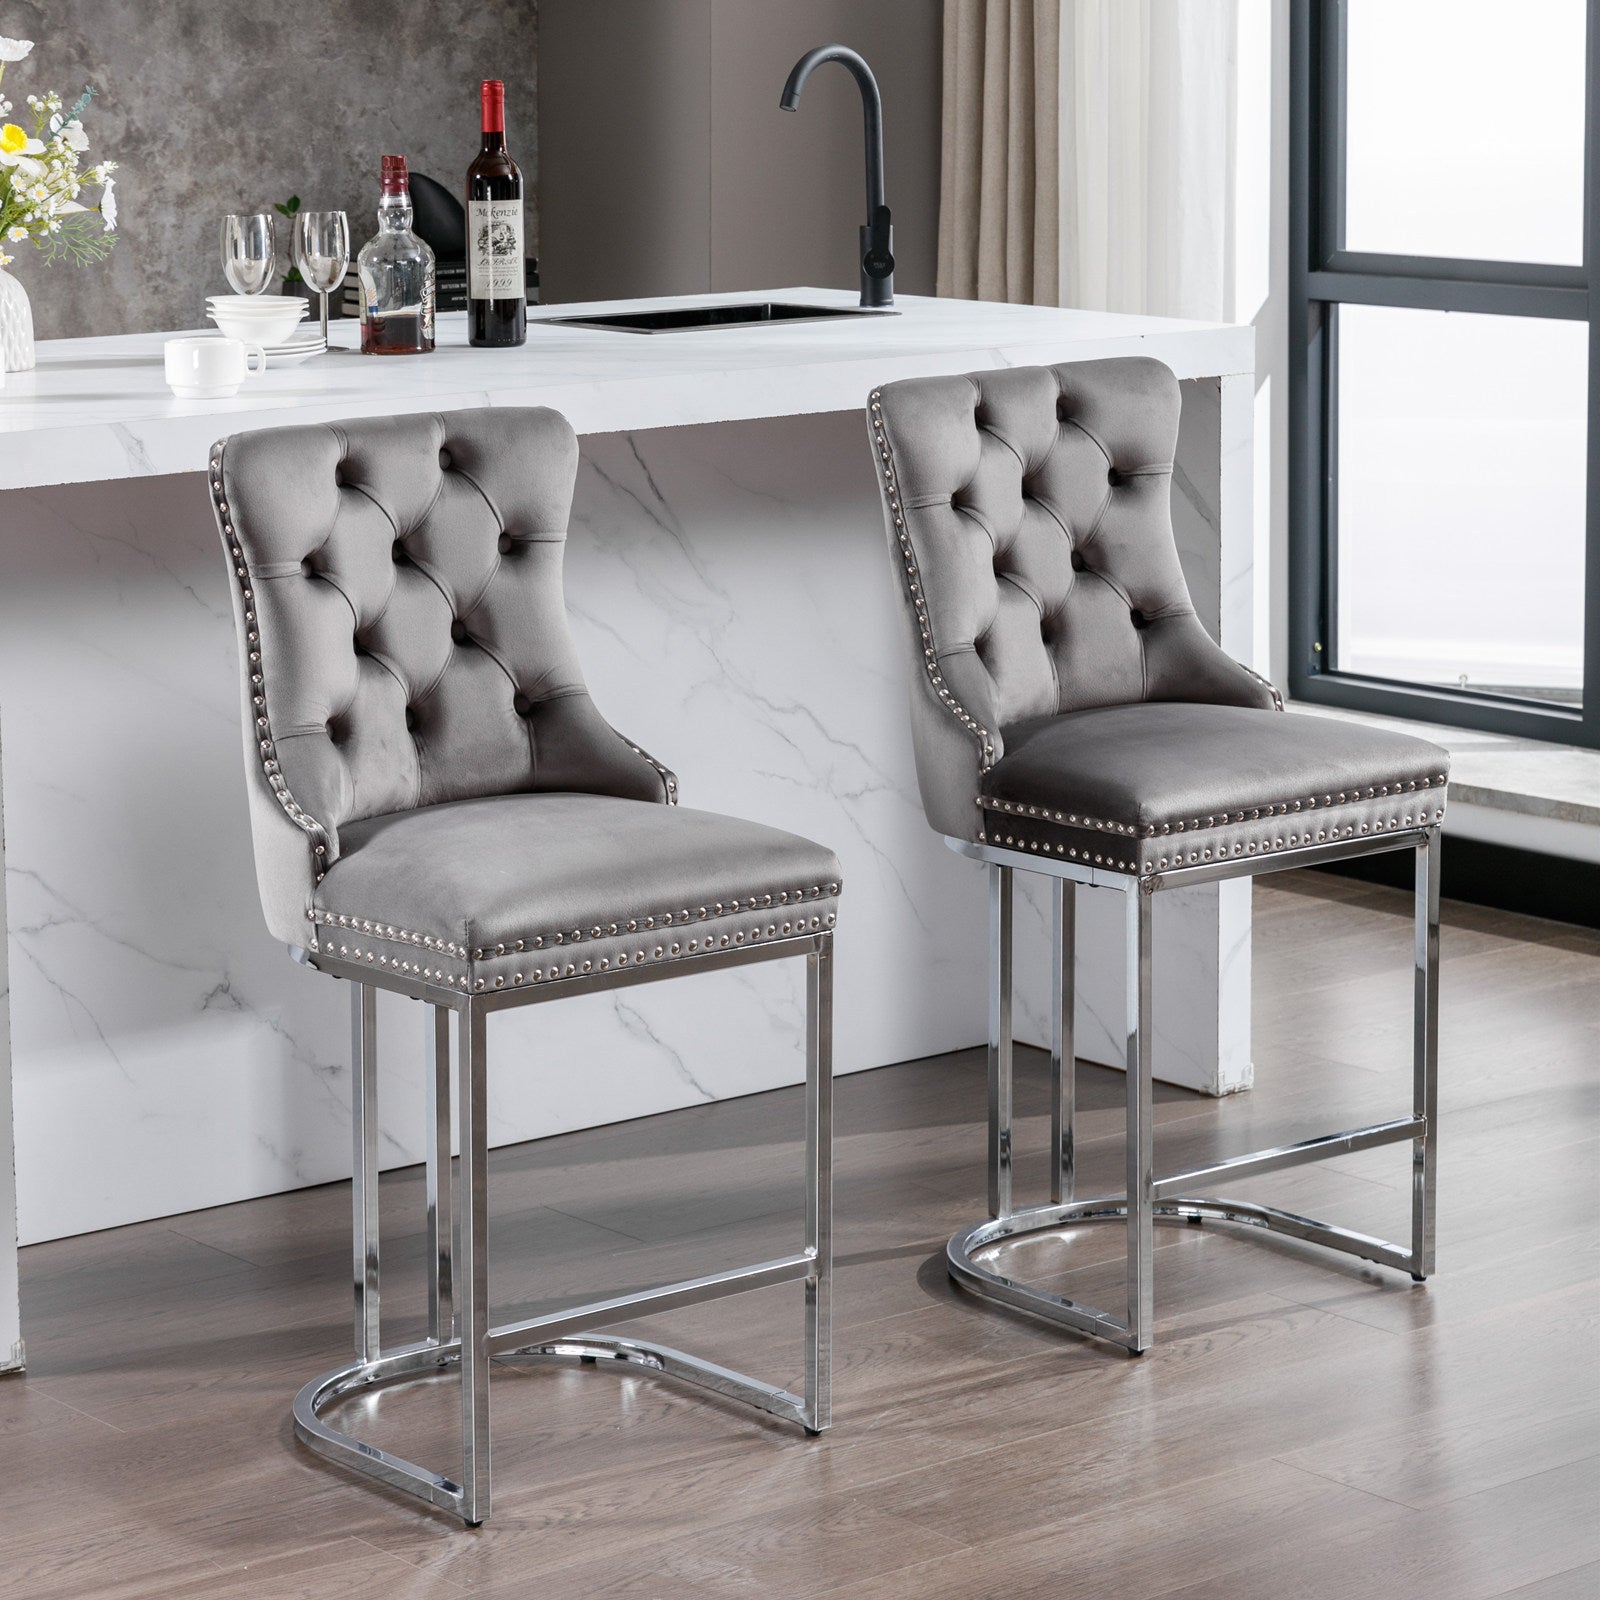 Set of 2, 26" Counter Height Modern Velvet Barstools with Button Back&Rivet Trim Upholstered Kitchen Island Chairs with Sturdy Chromed Metal Base Legs Farmhouse - Gray